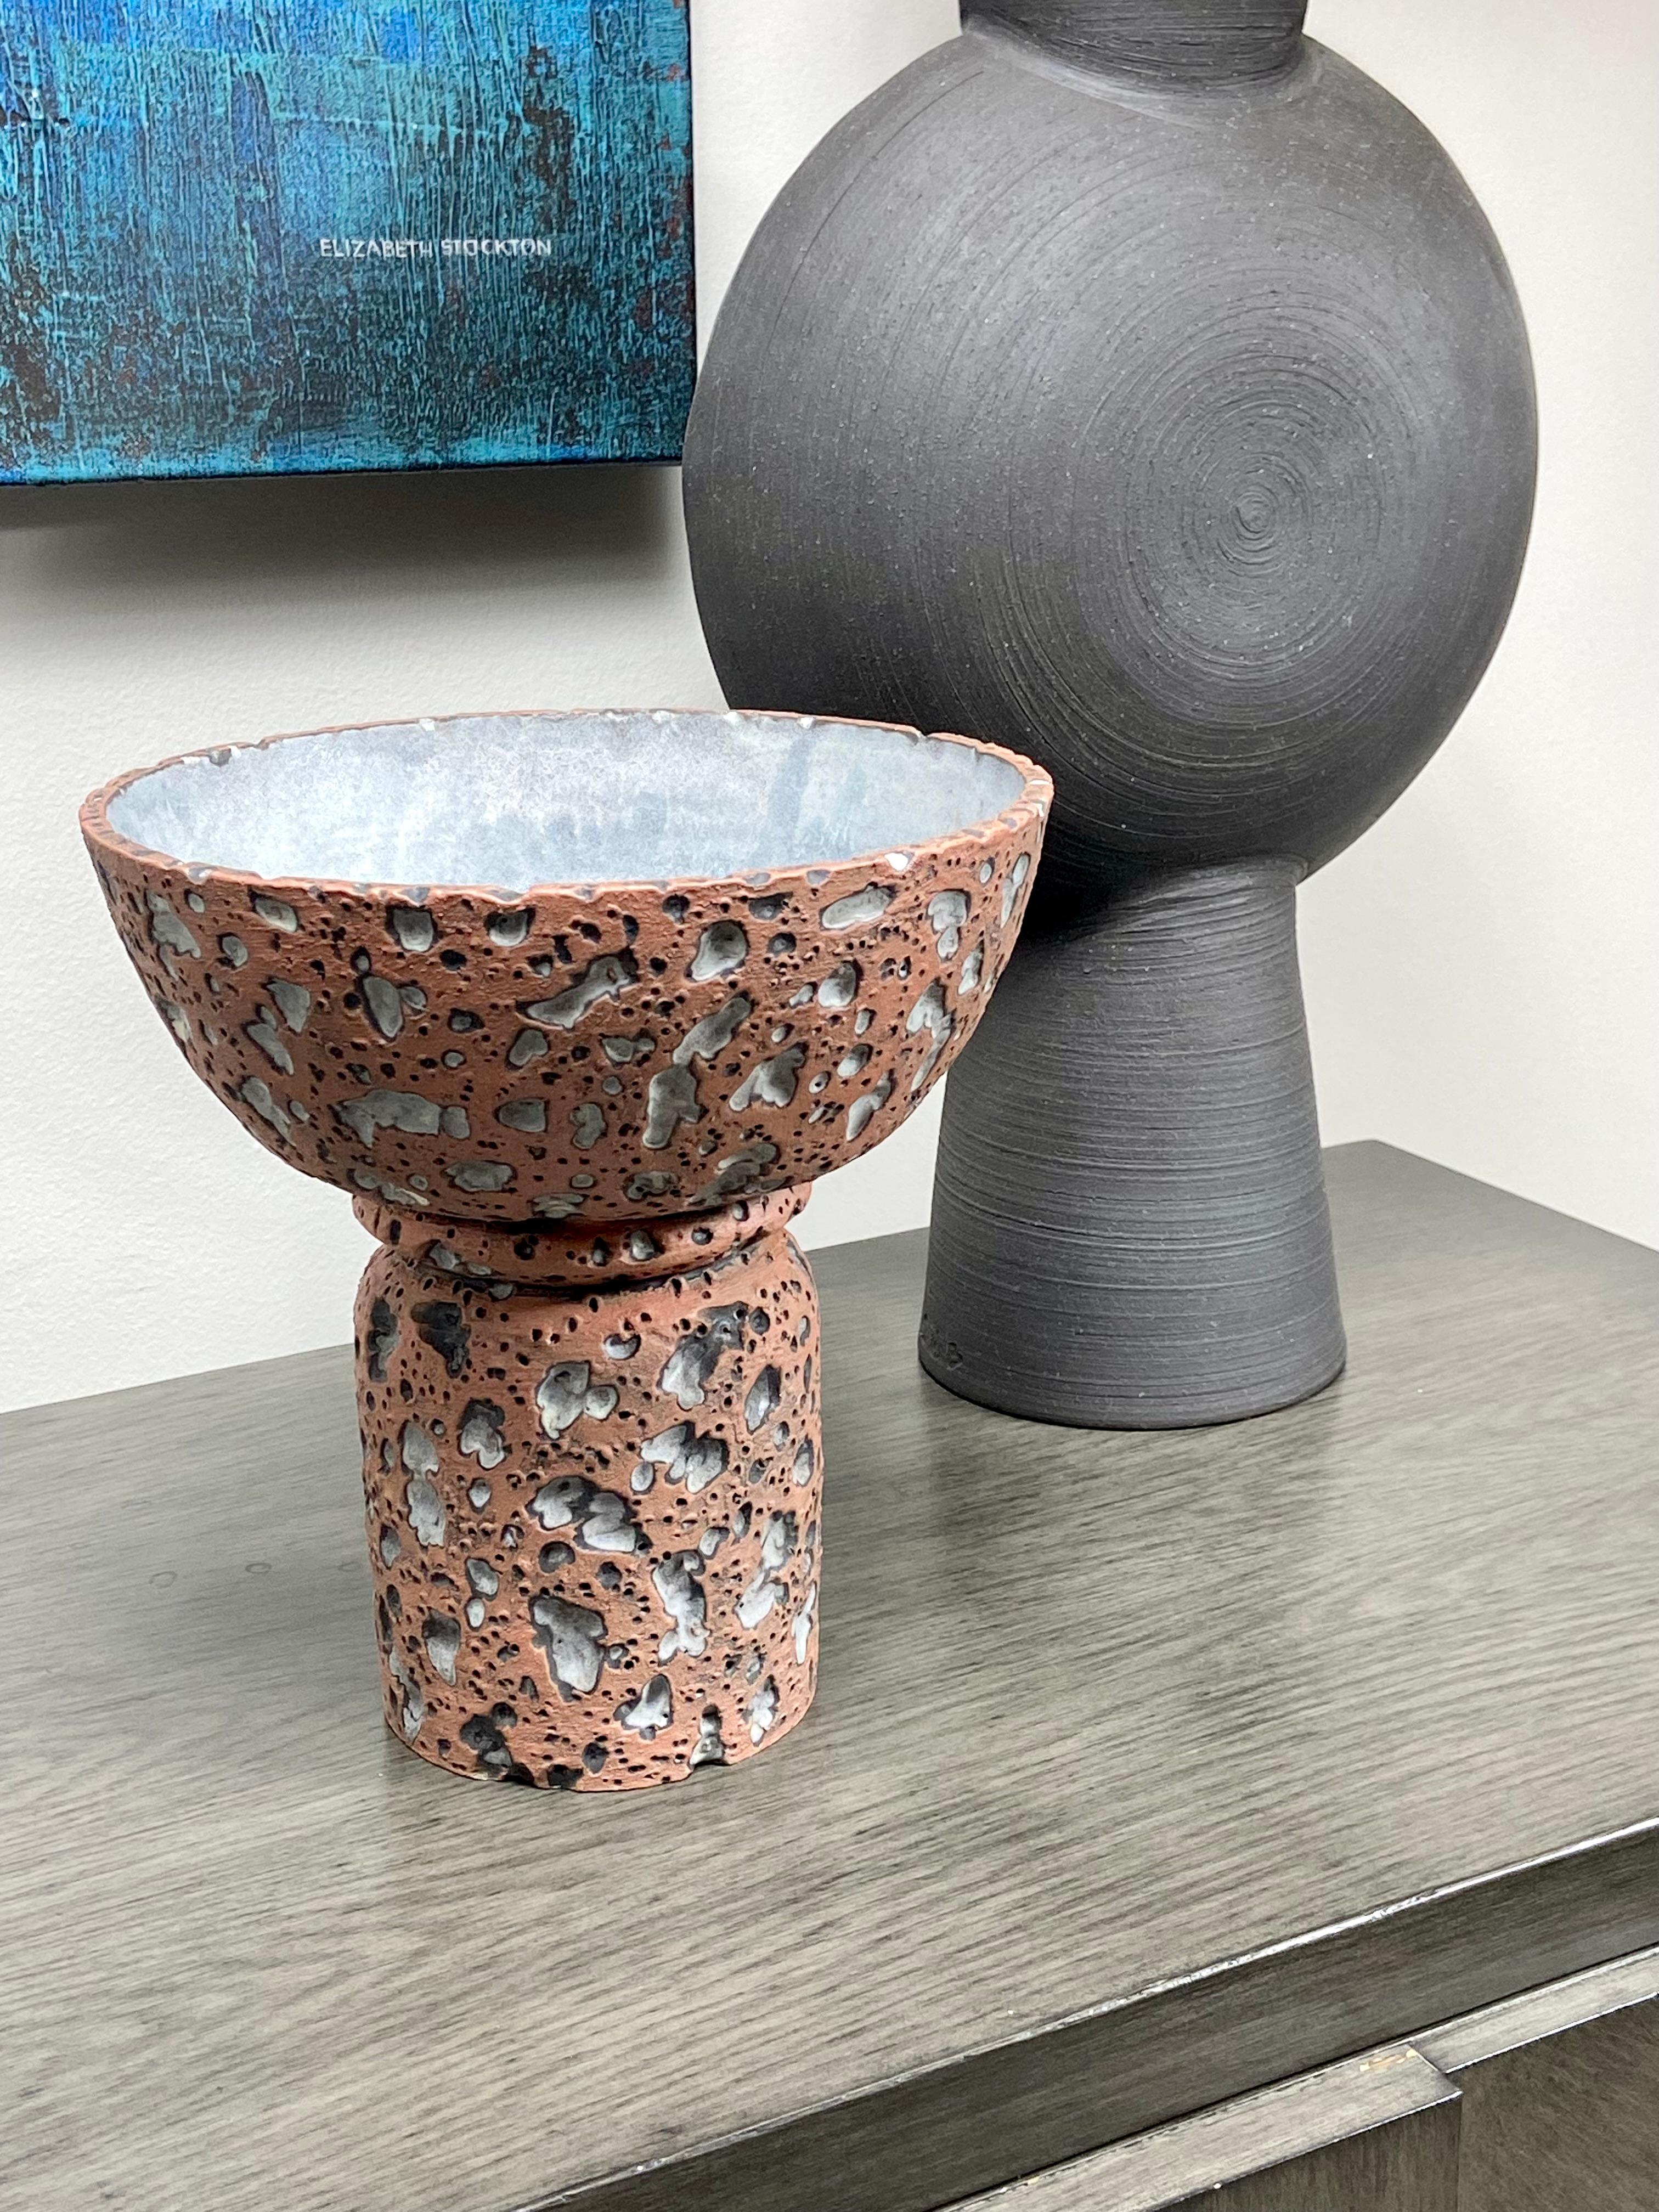 A stunning ceramic footed bowl in a lava glaze by Los Angeles based LGS Studio. This beautiful bowl is a great example of the intricacy of their work. It has Mid-Century inspired tactile lava glaze in a terracotta color with a contrasting smooth